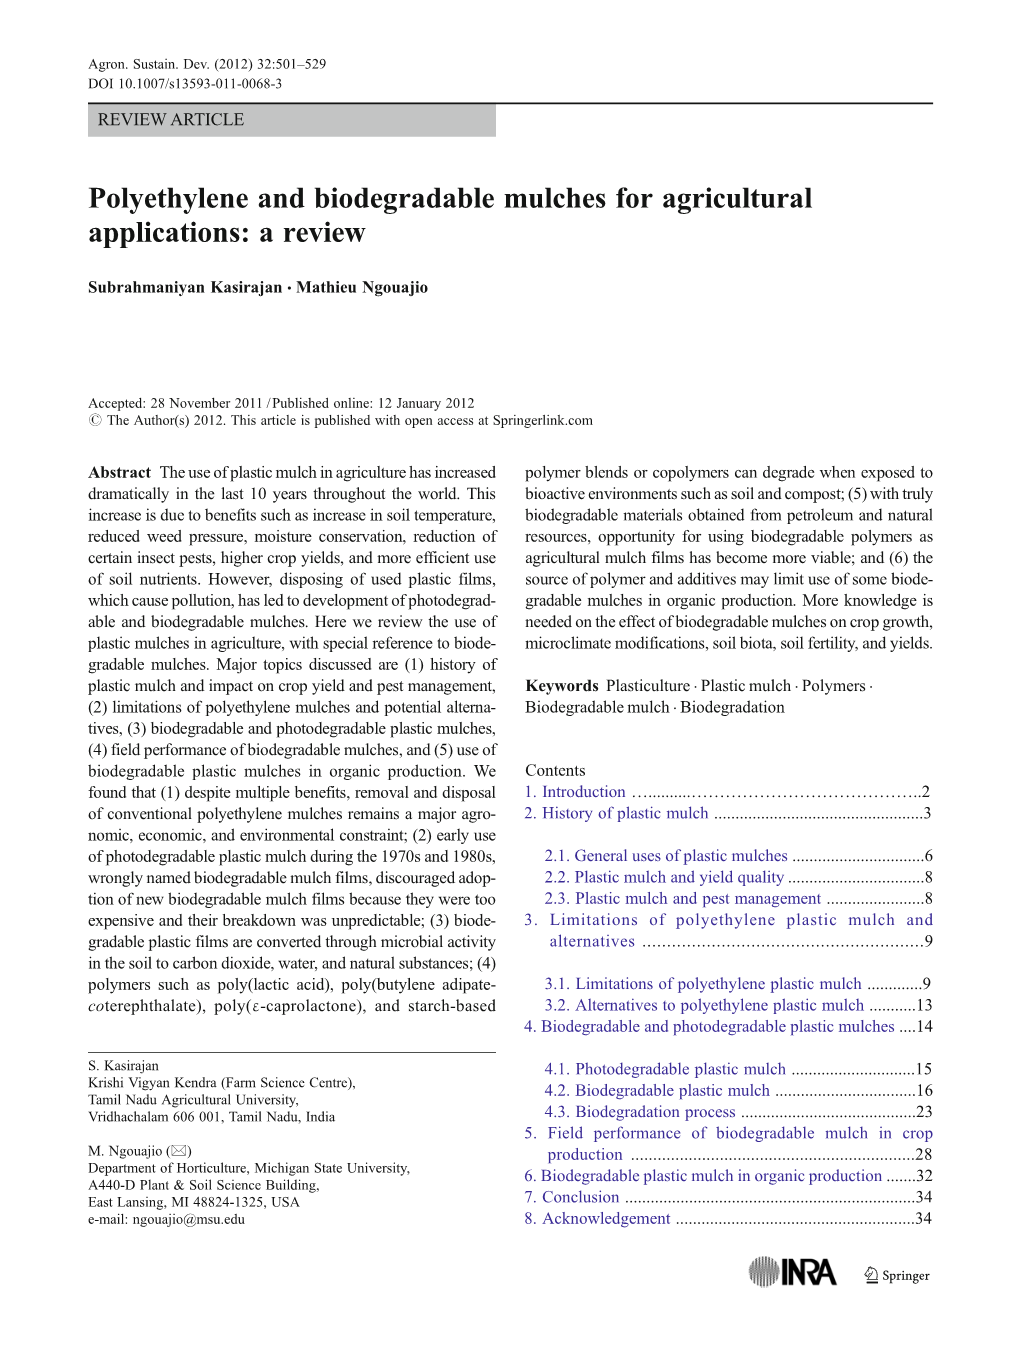 Polyethylene and Biodegradable Mulches for Agricultural Applications: a Review